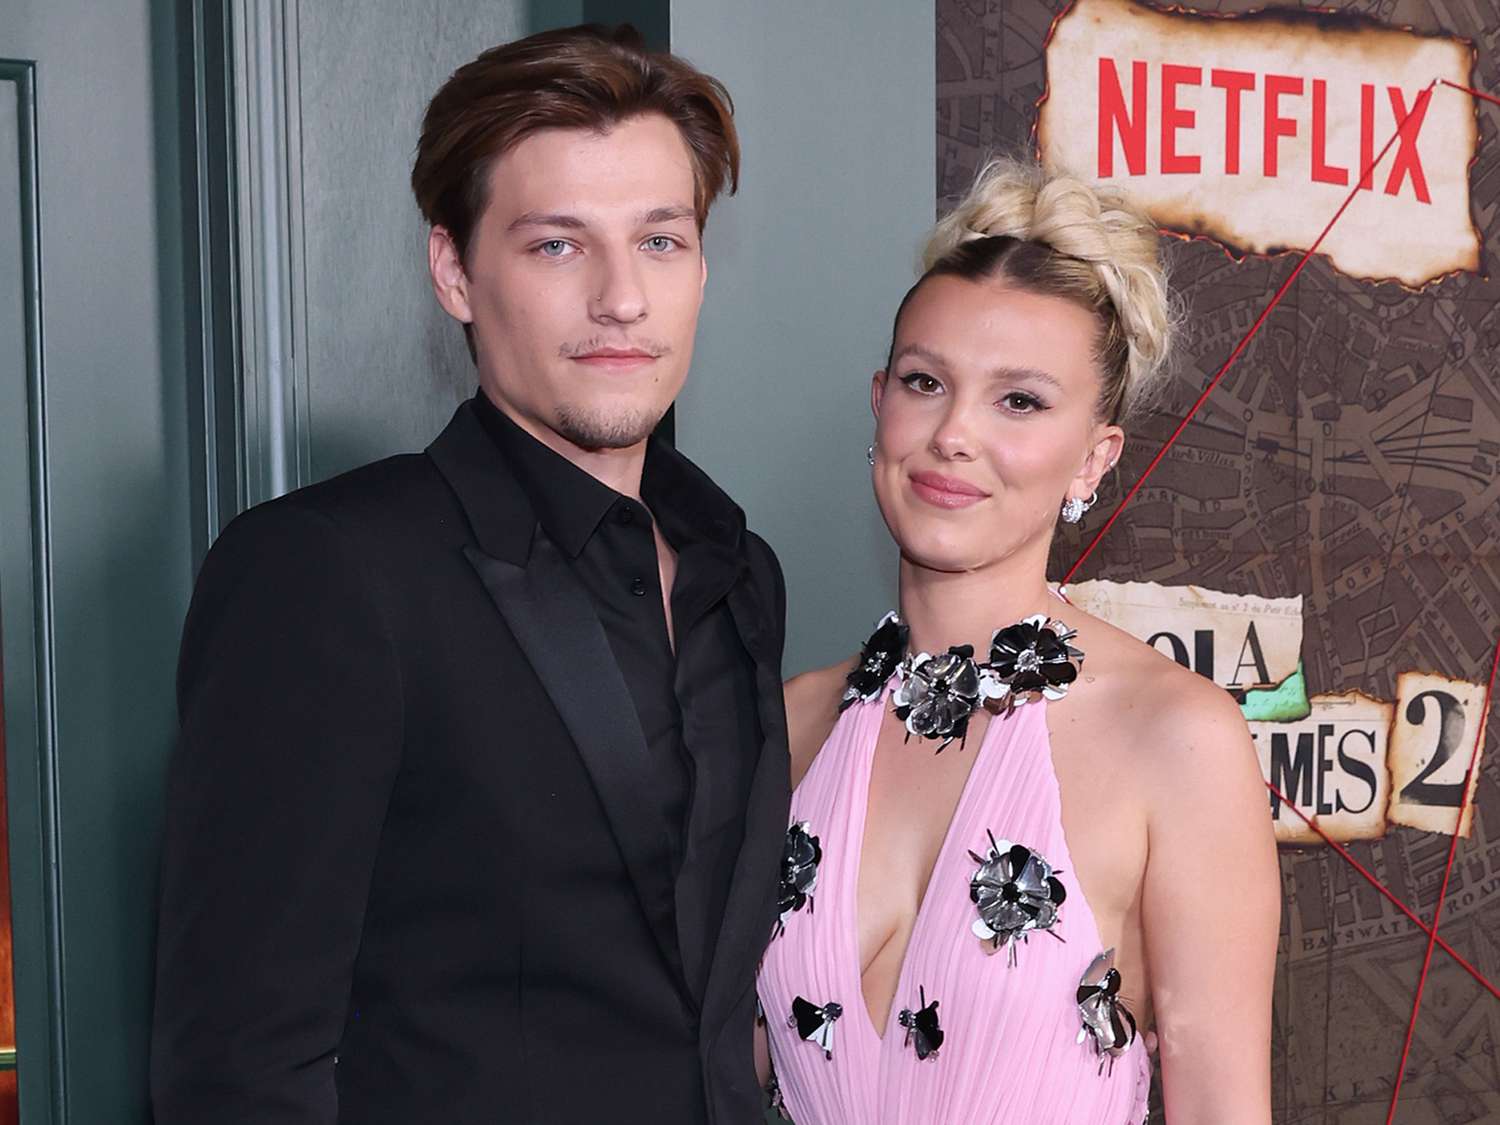 Millie Bobby Brown and Jake Bongiovi: An Unforgettable Romance That Took Hollywood By Storm! 21